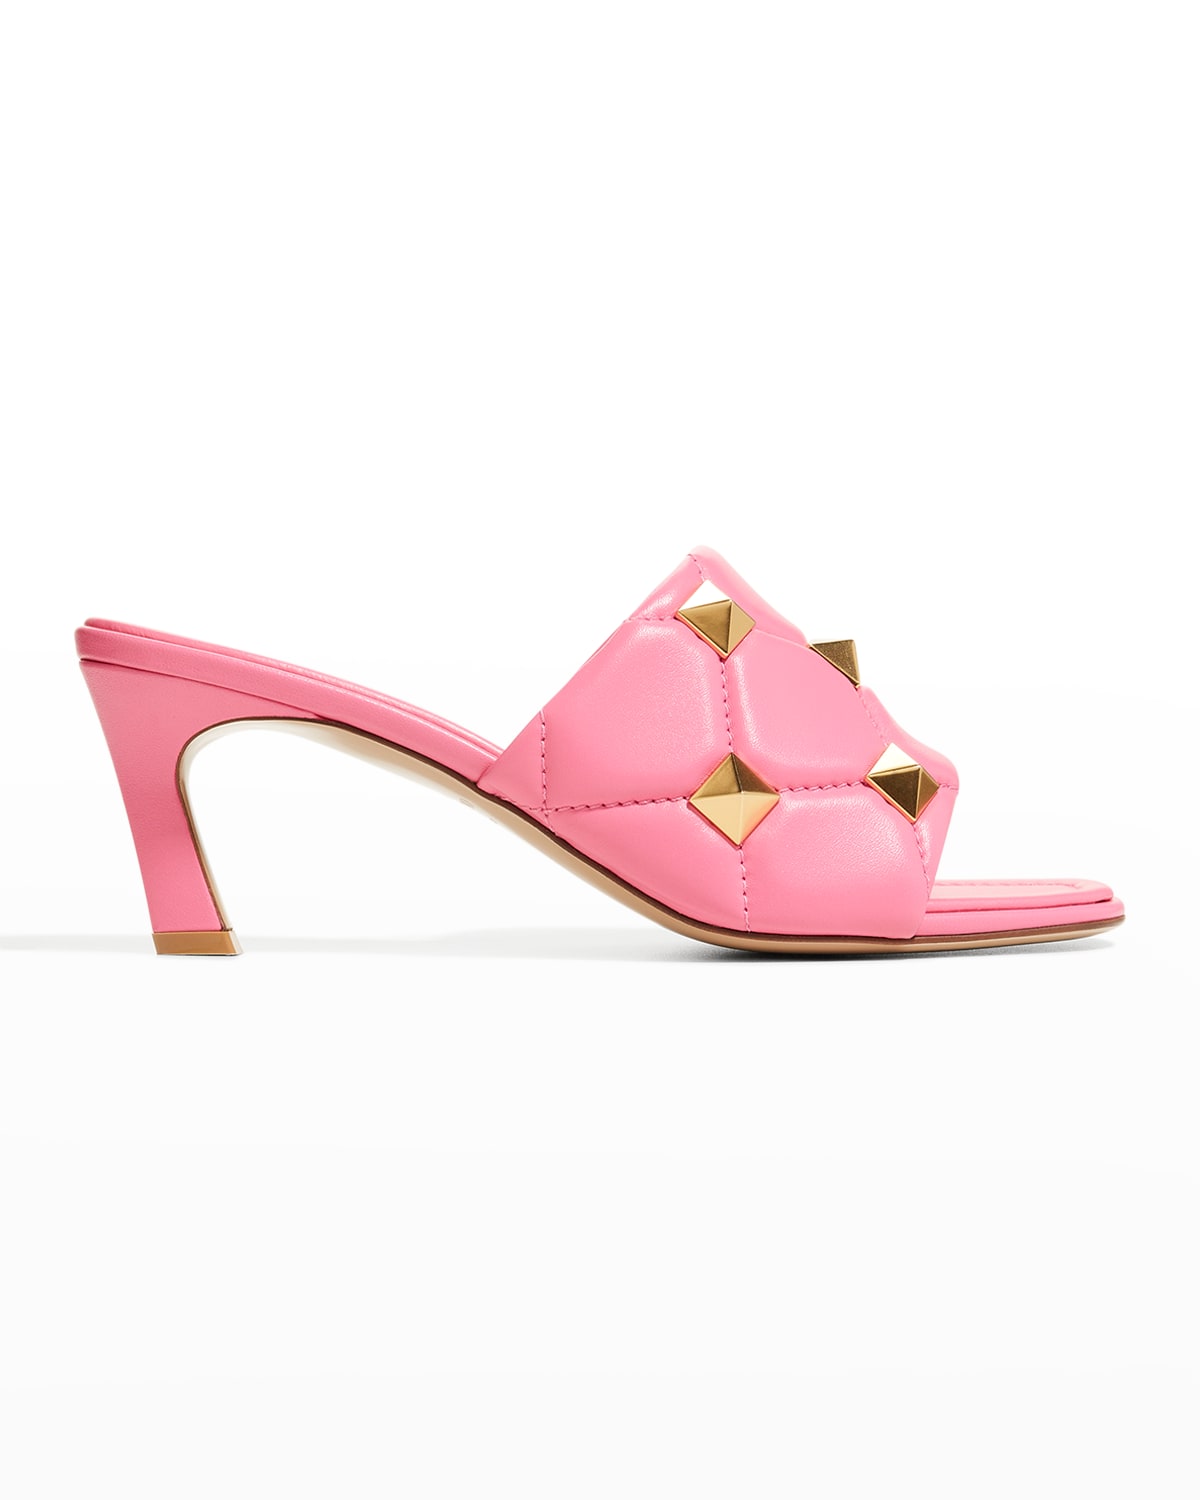 Valentino Studded Shoes | Neiman Marcus